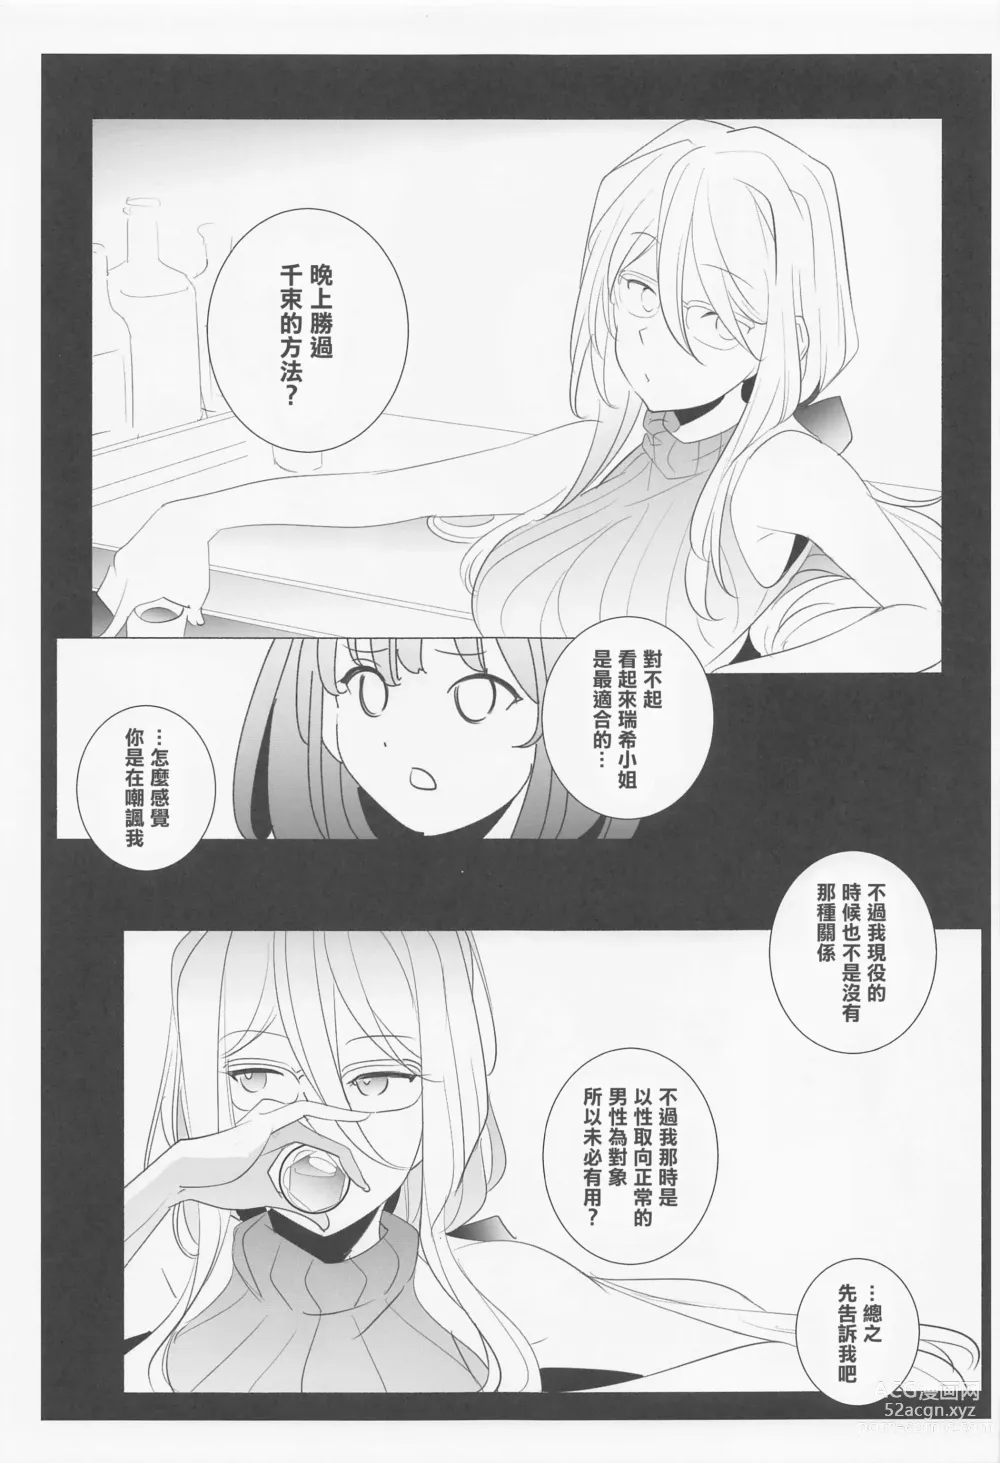 Page 12 of doujinshi INTER MISSION